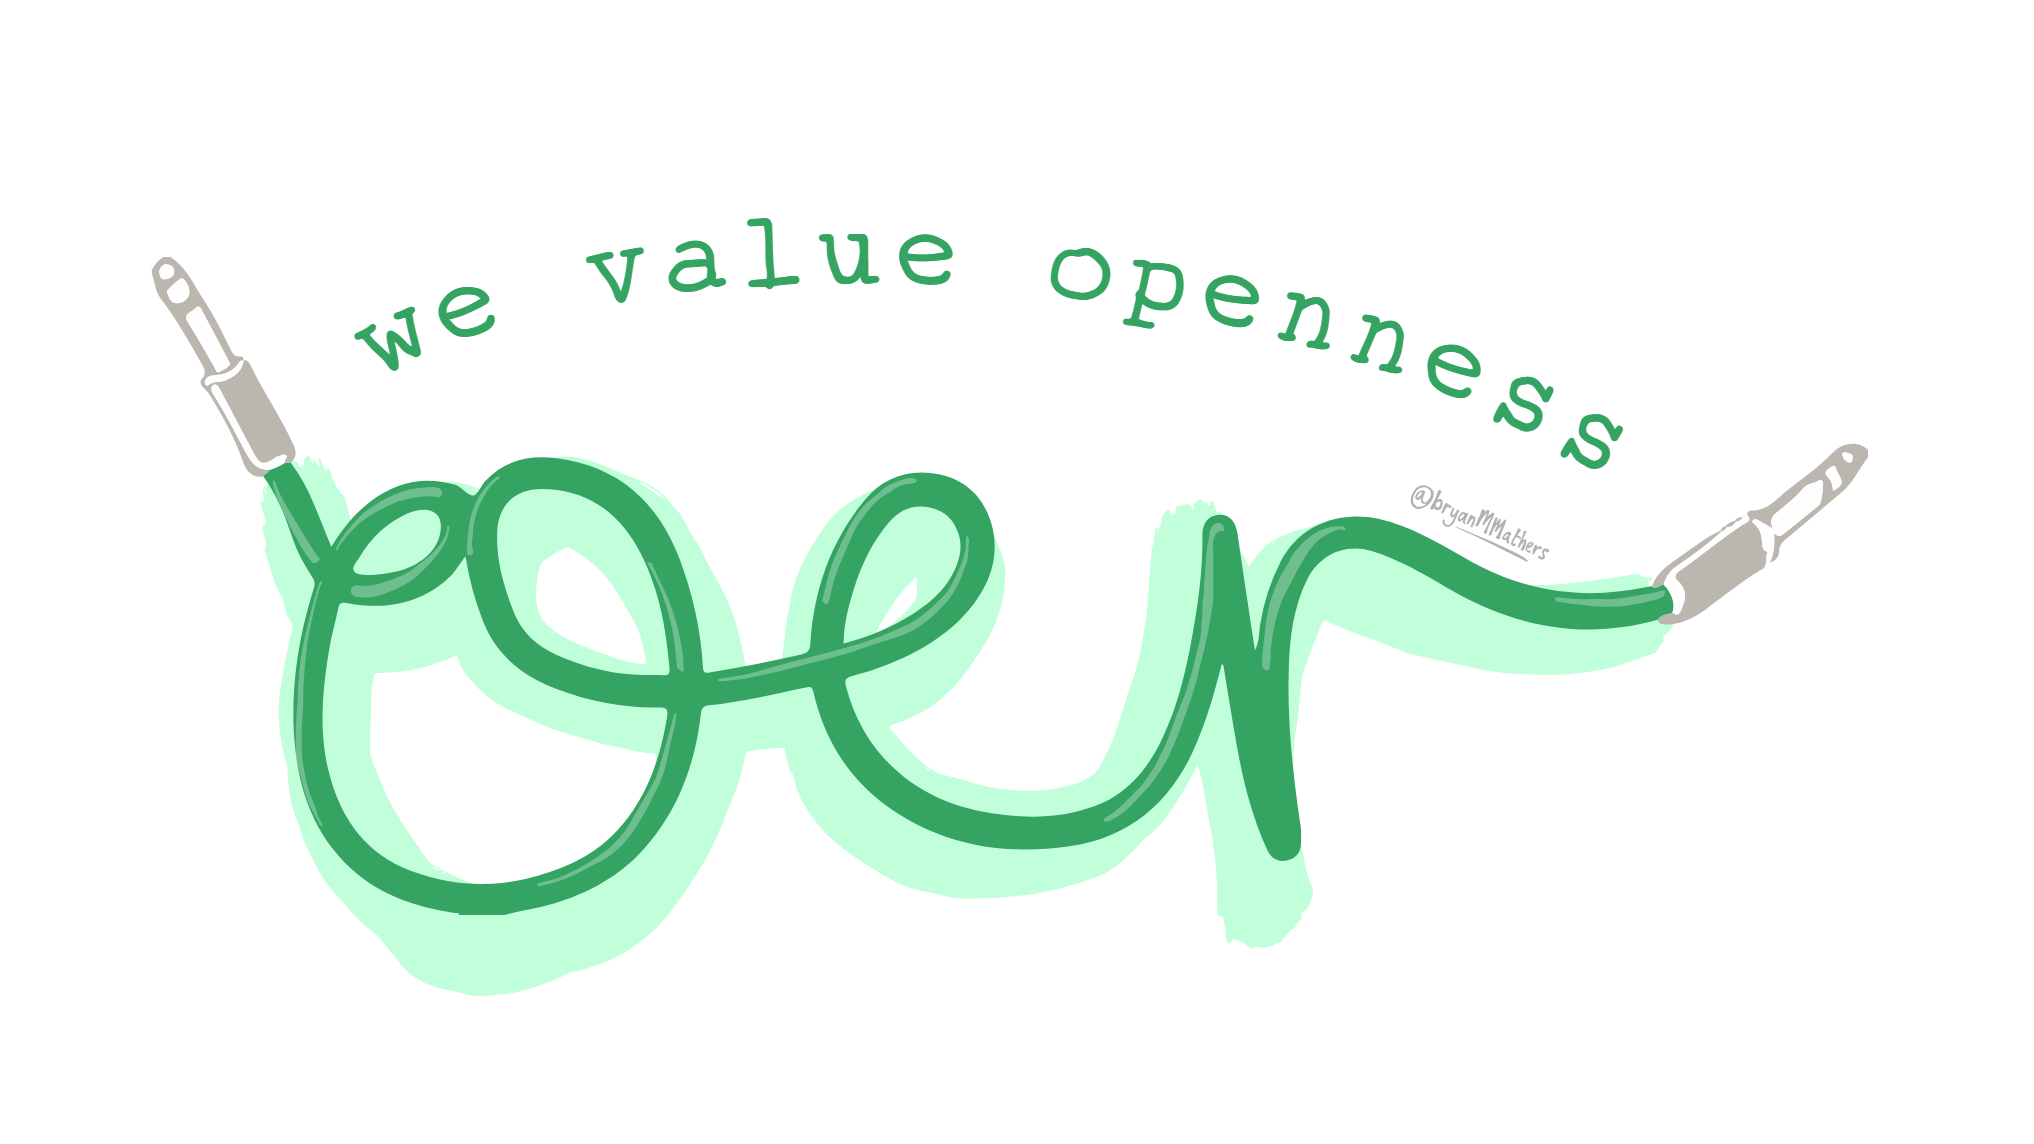 OER18: we value openness